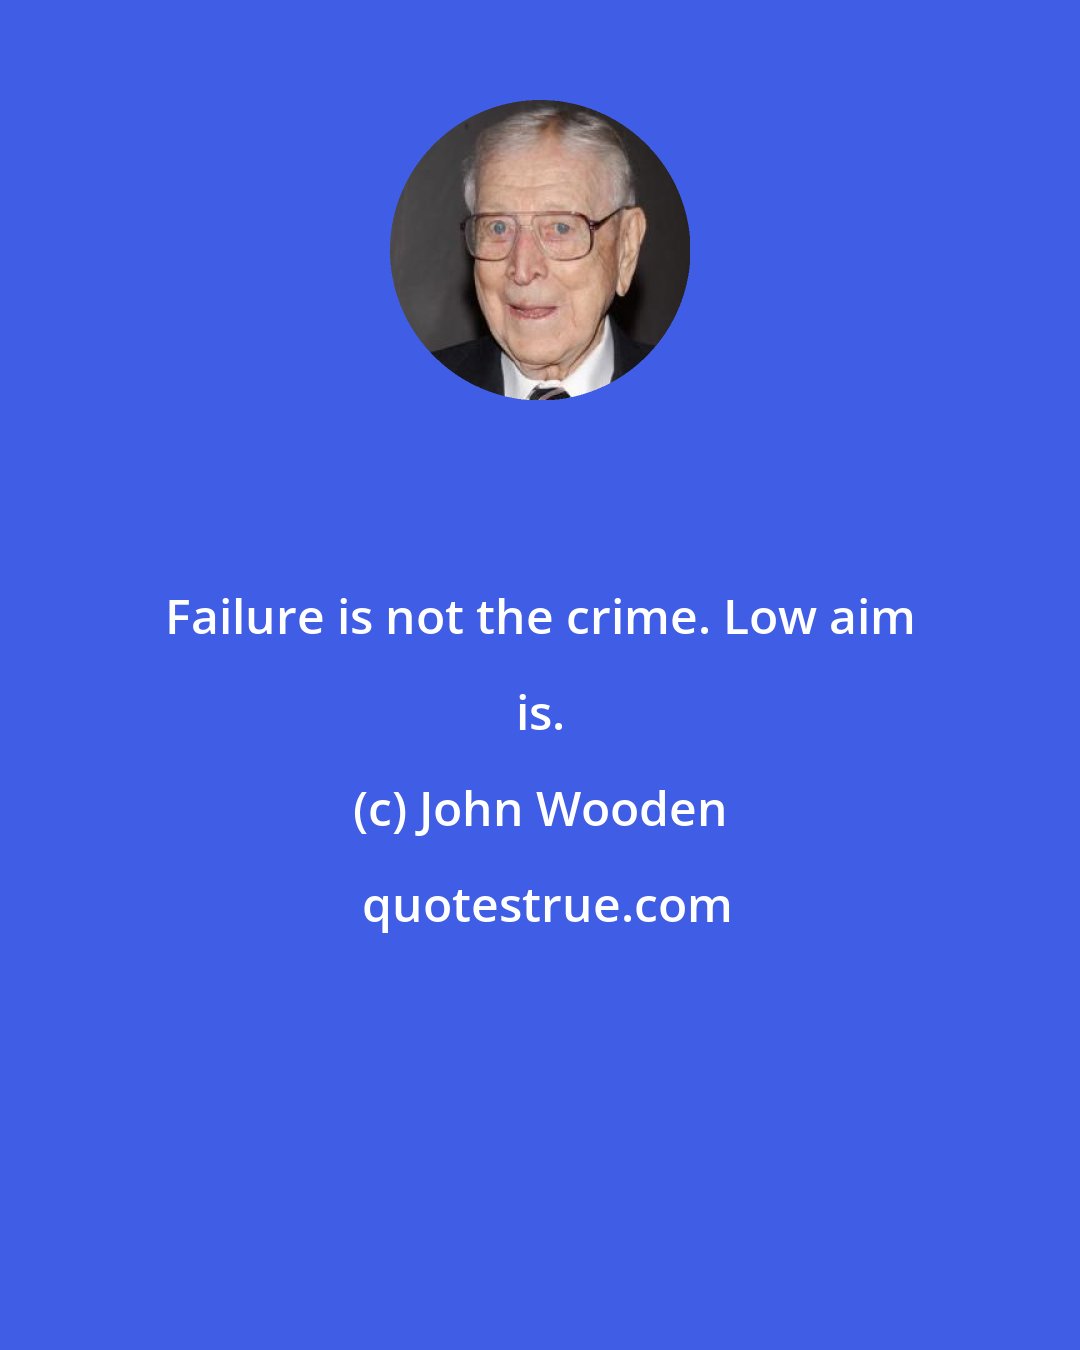 John Wooden: Failure is not the crime. Low aim is.